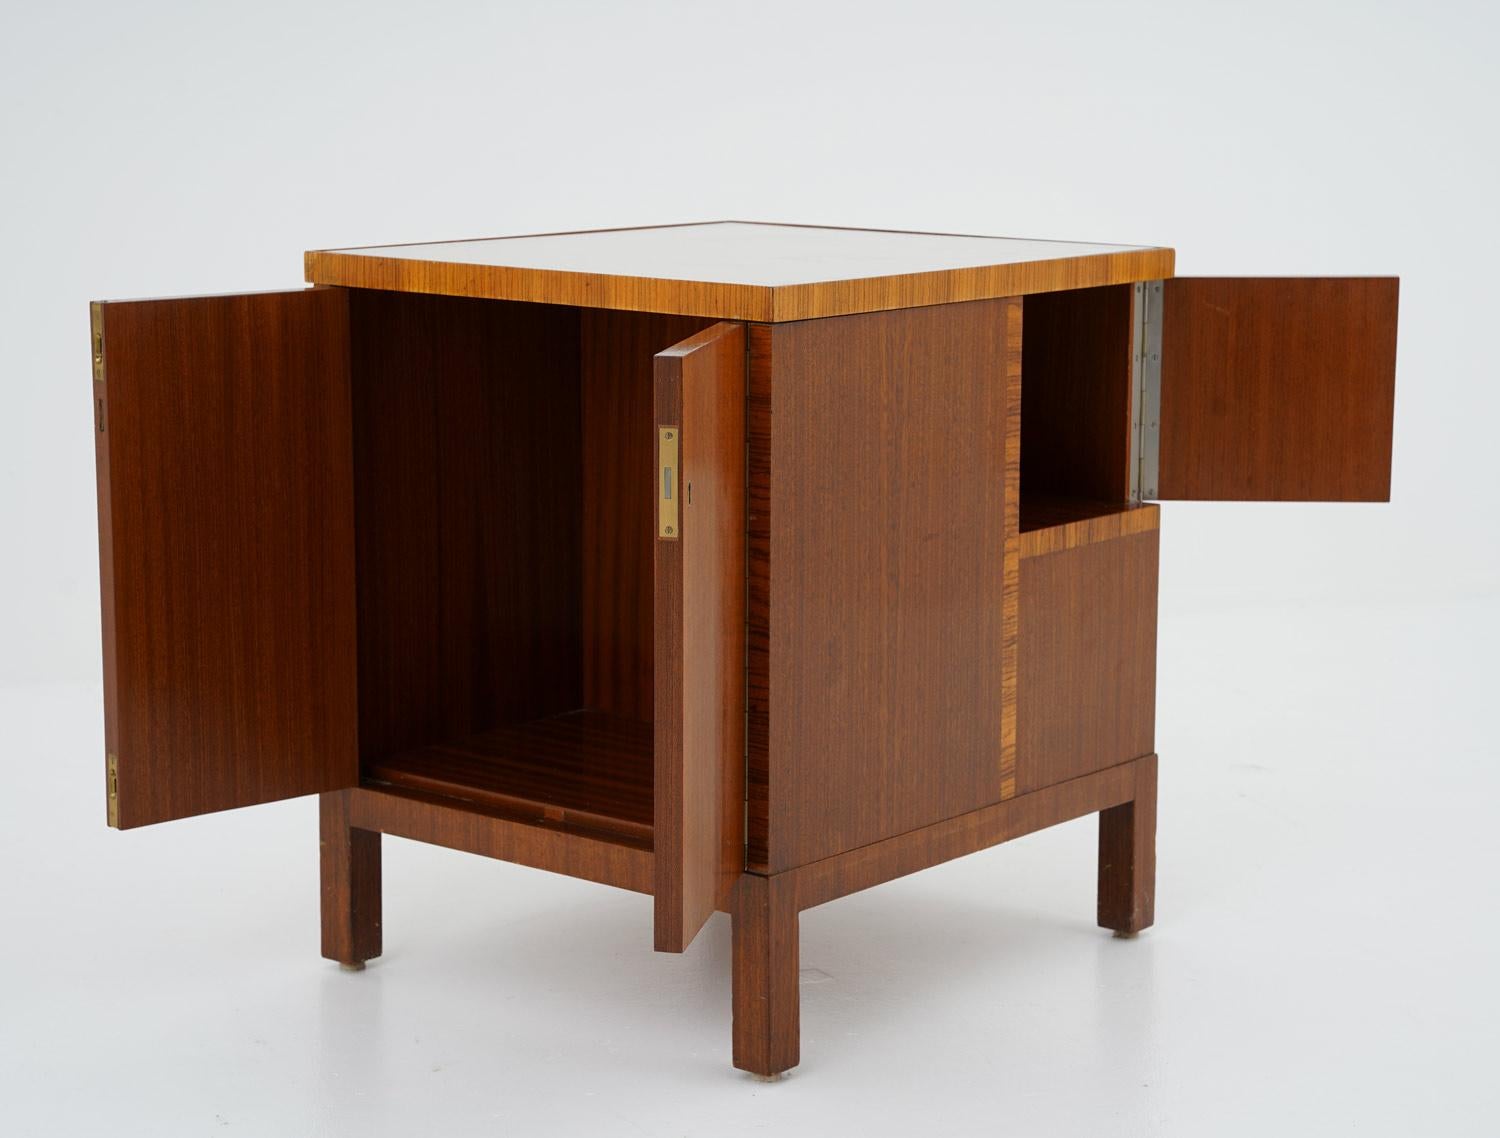 20th Century Swedish Art Deco Side Table / Bar Table For Sale